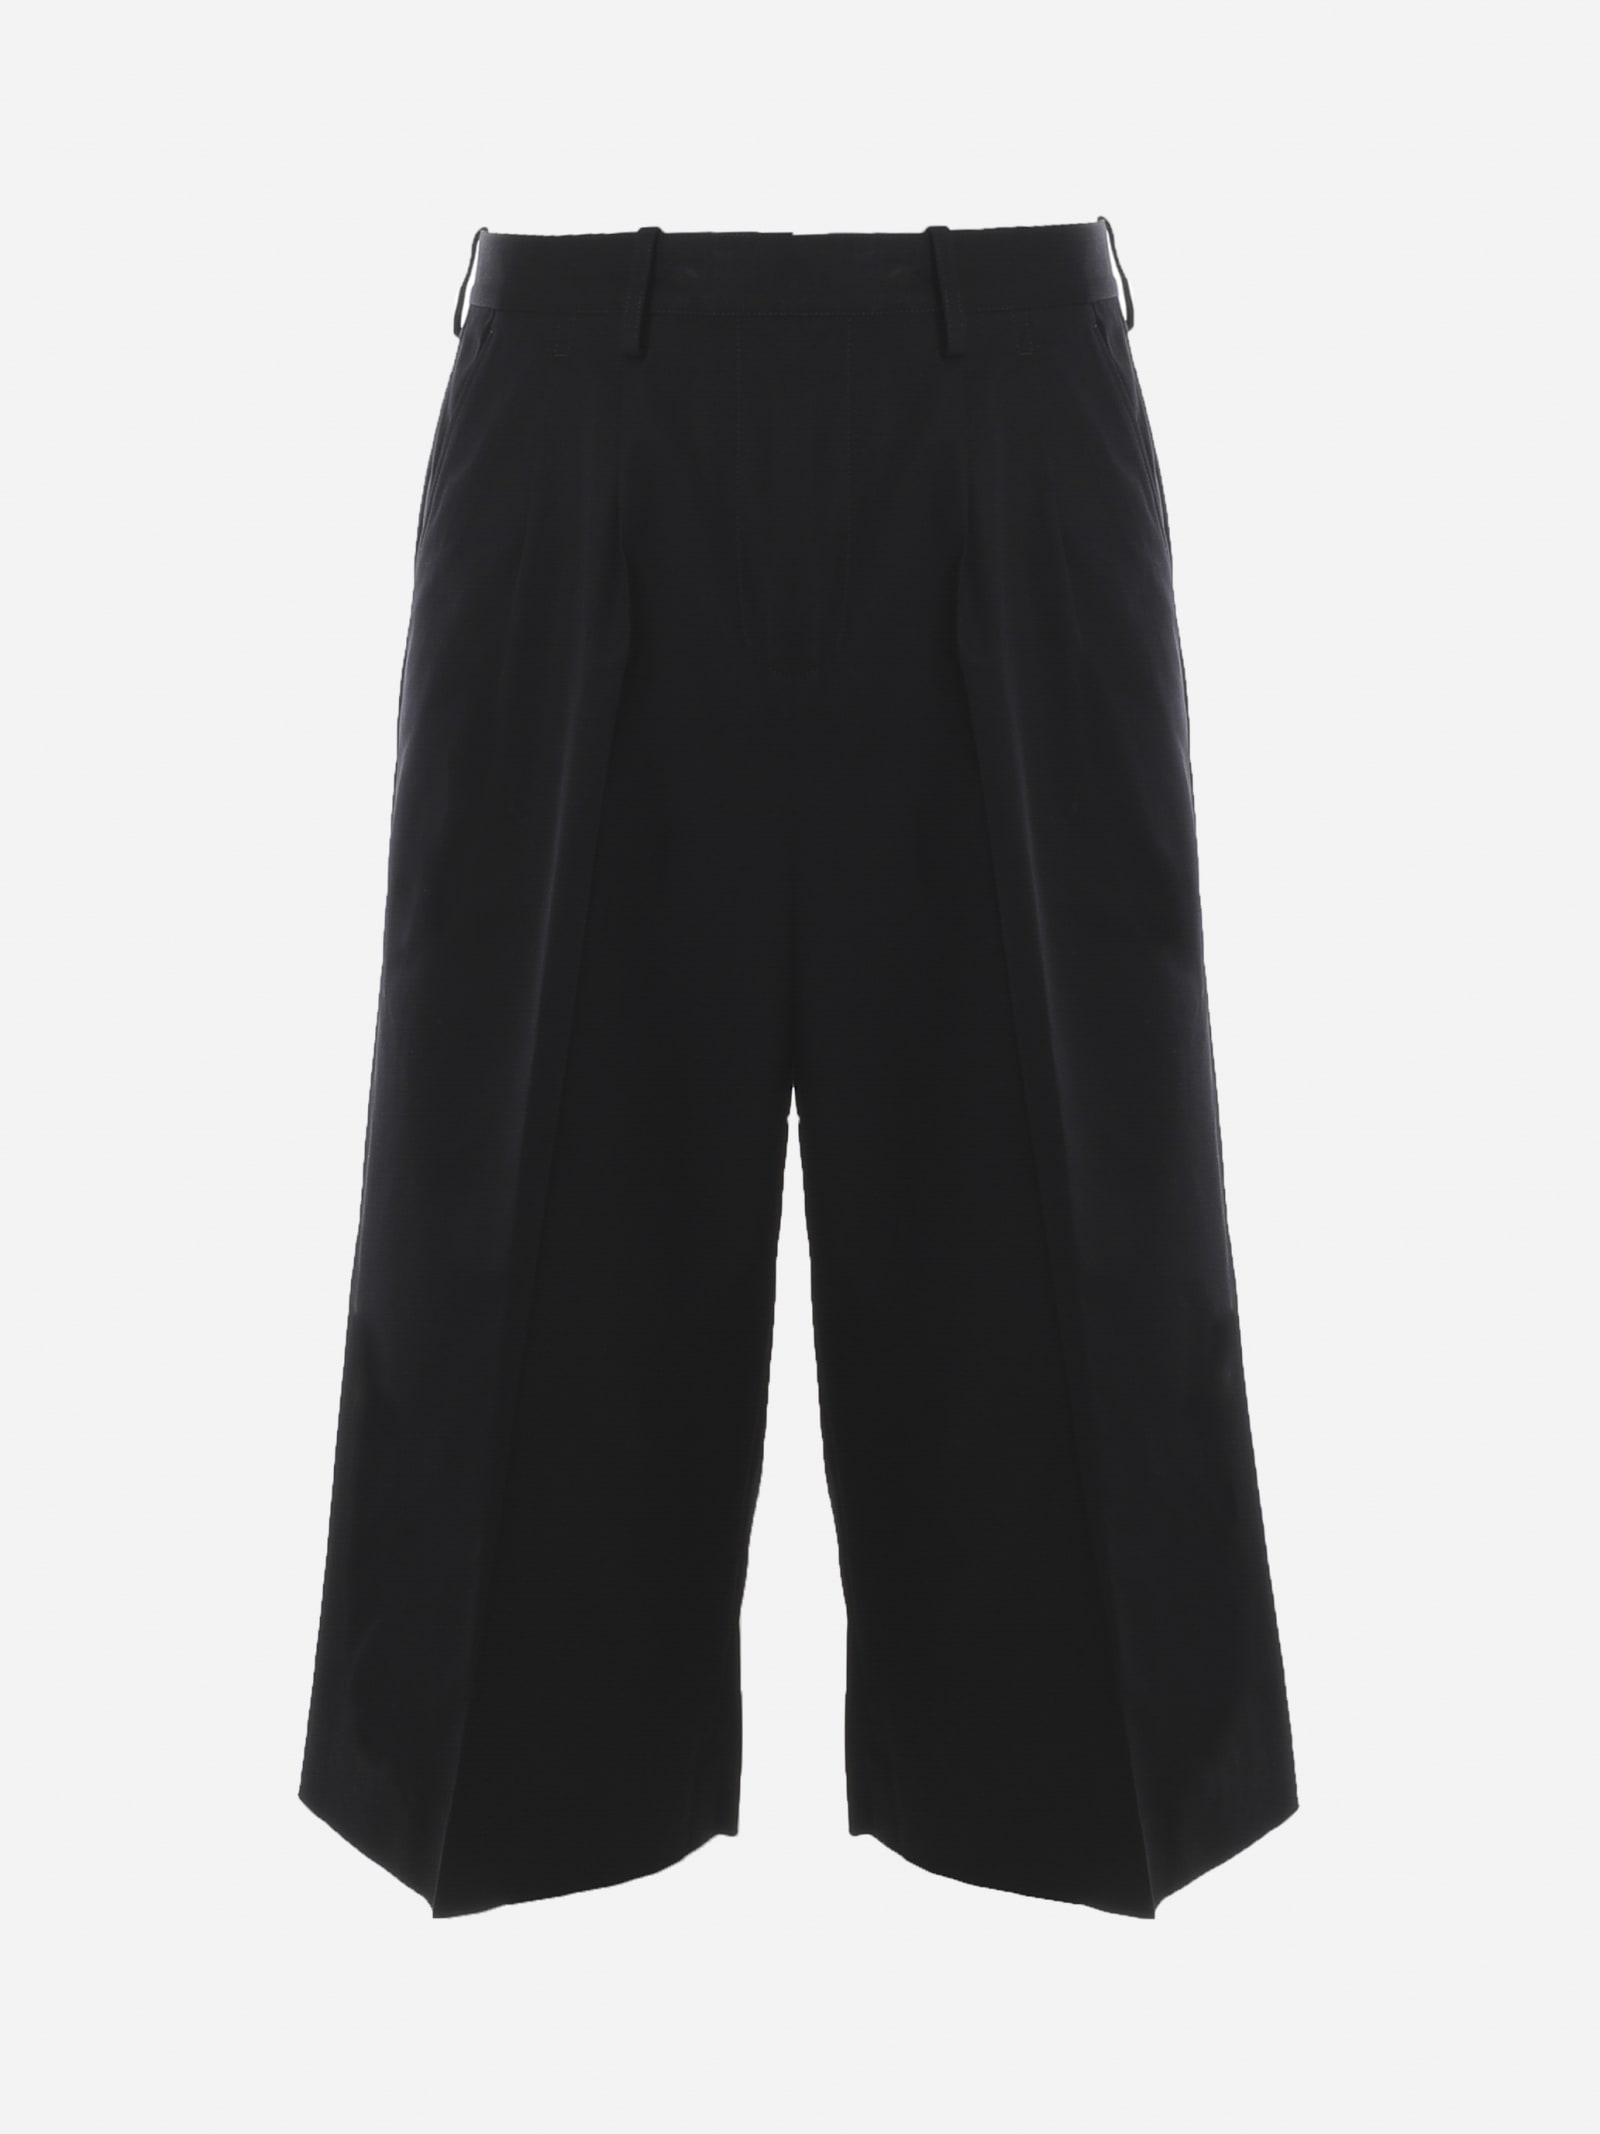 J.W. Anderson Black Cropped Tailored Trousers